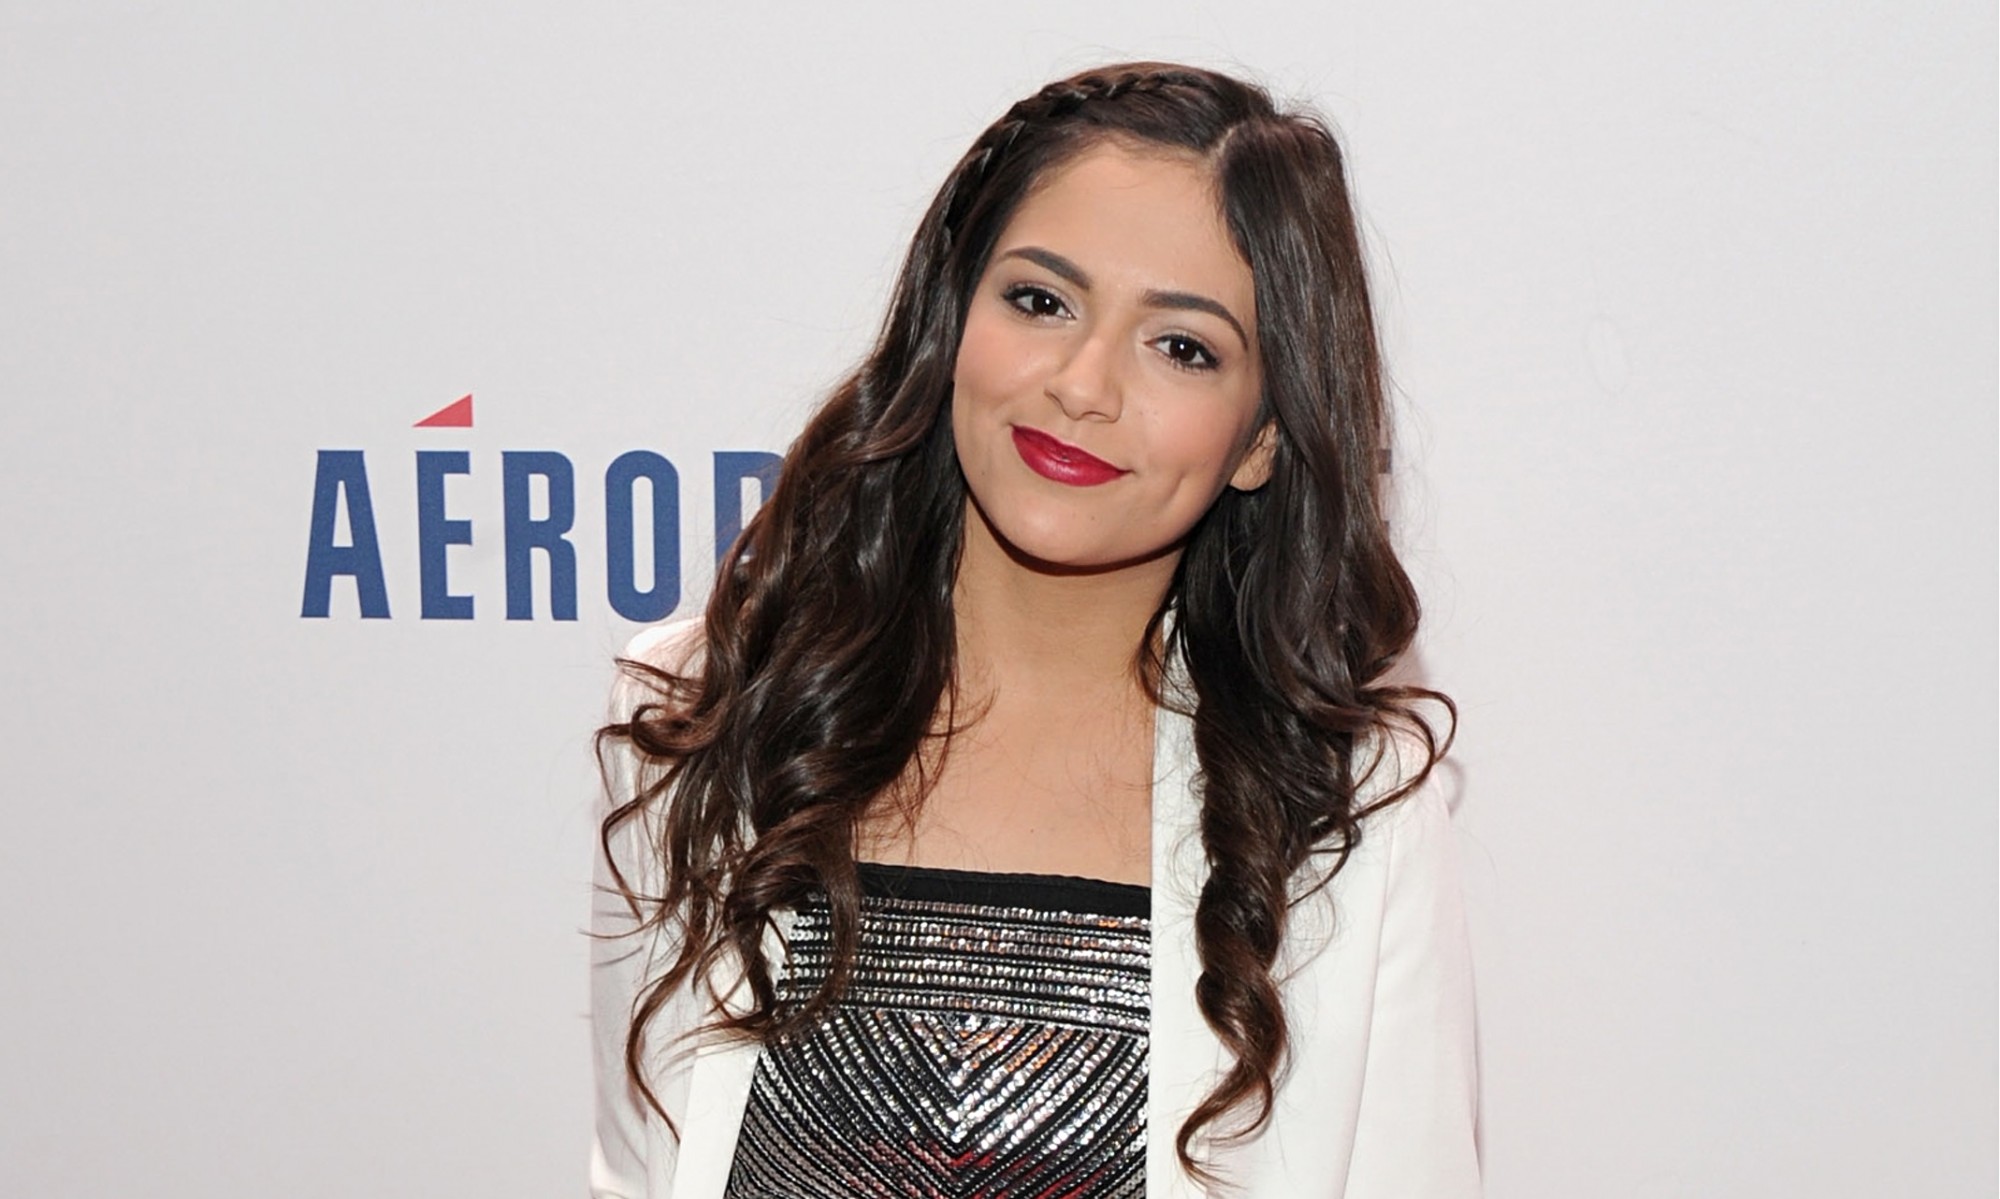 Bethany Mota (via via Bryan Bedder/Getty Images for Clear Channel)